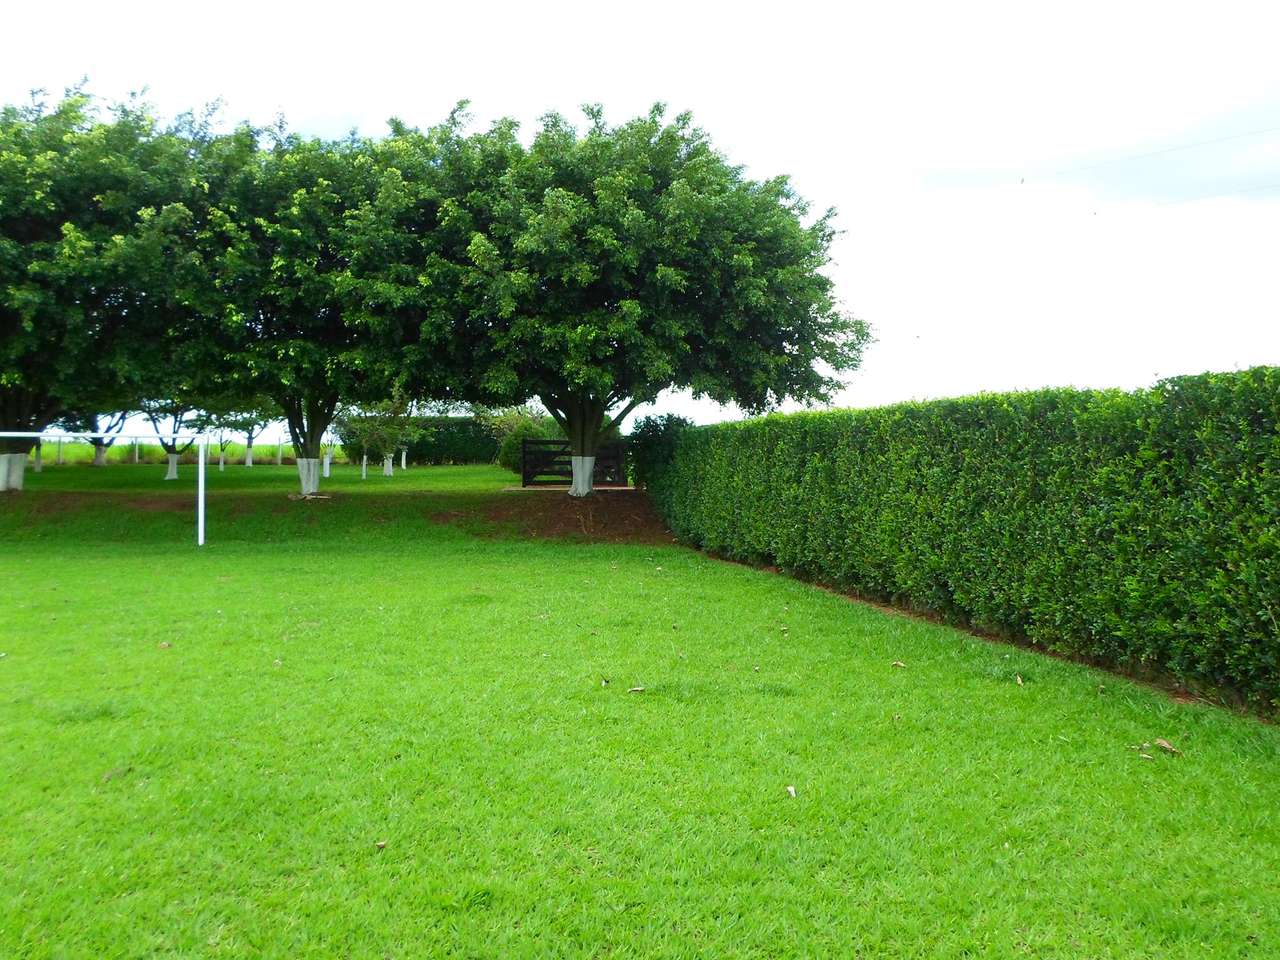 Hedge puzzle online from photo